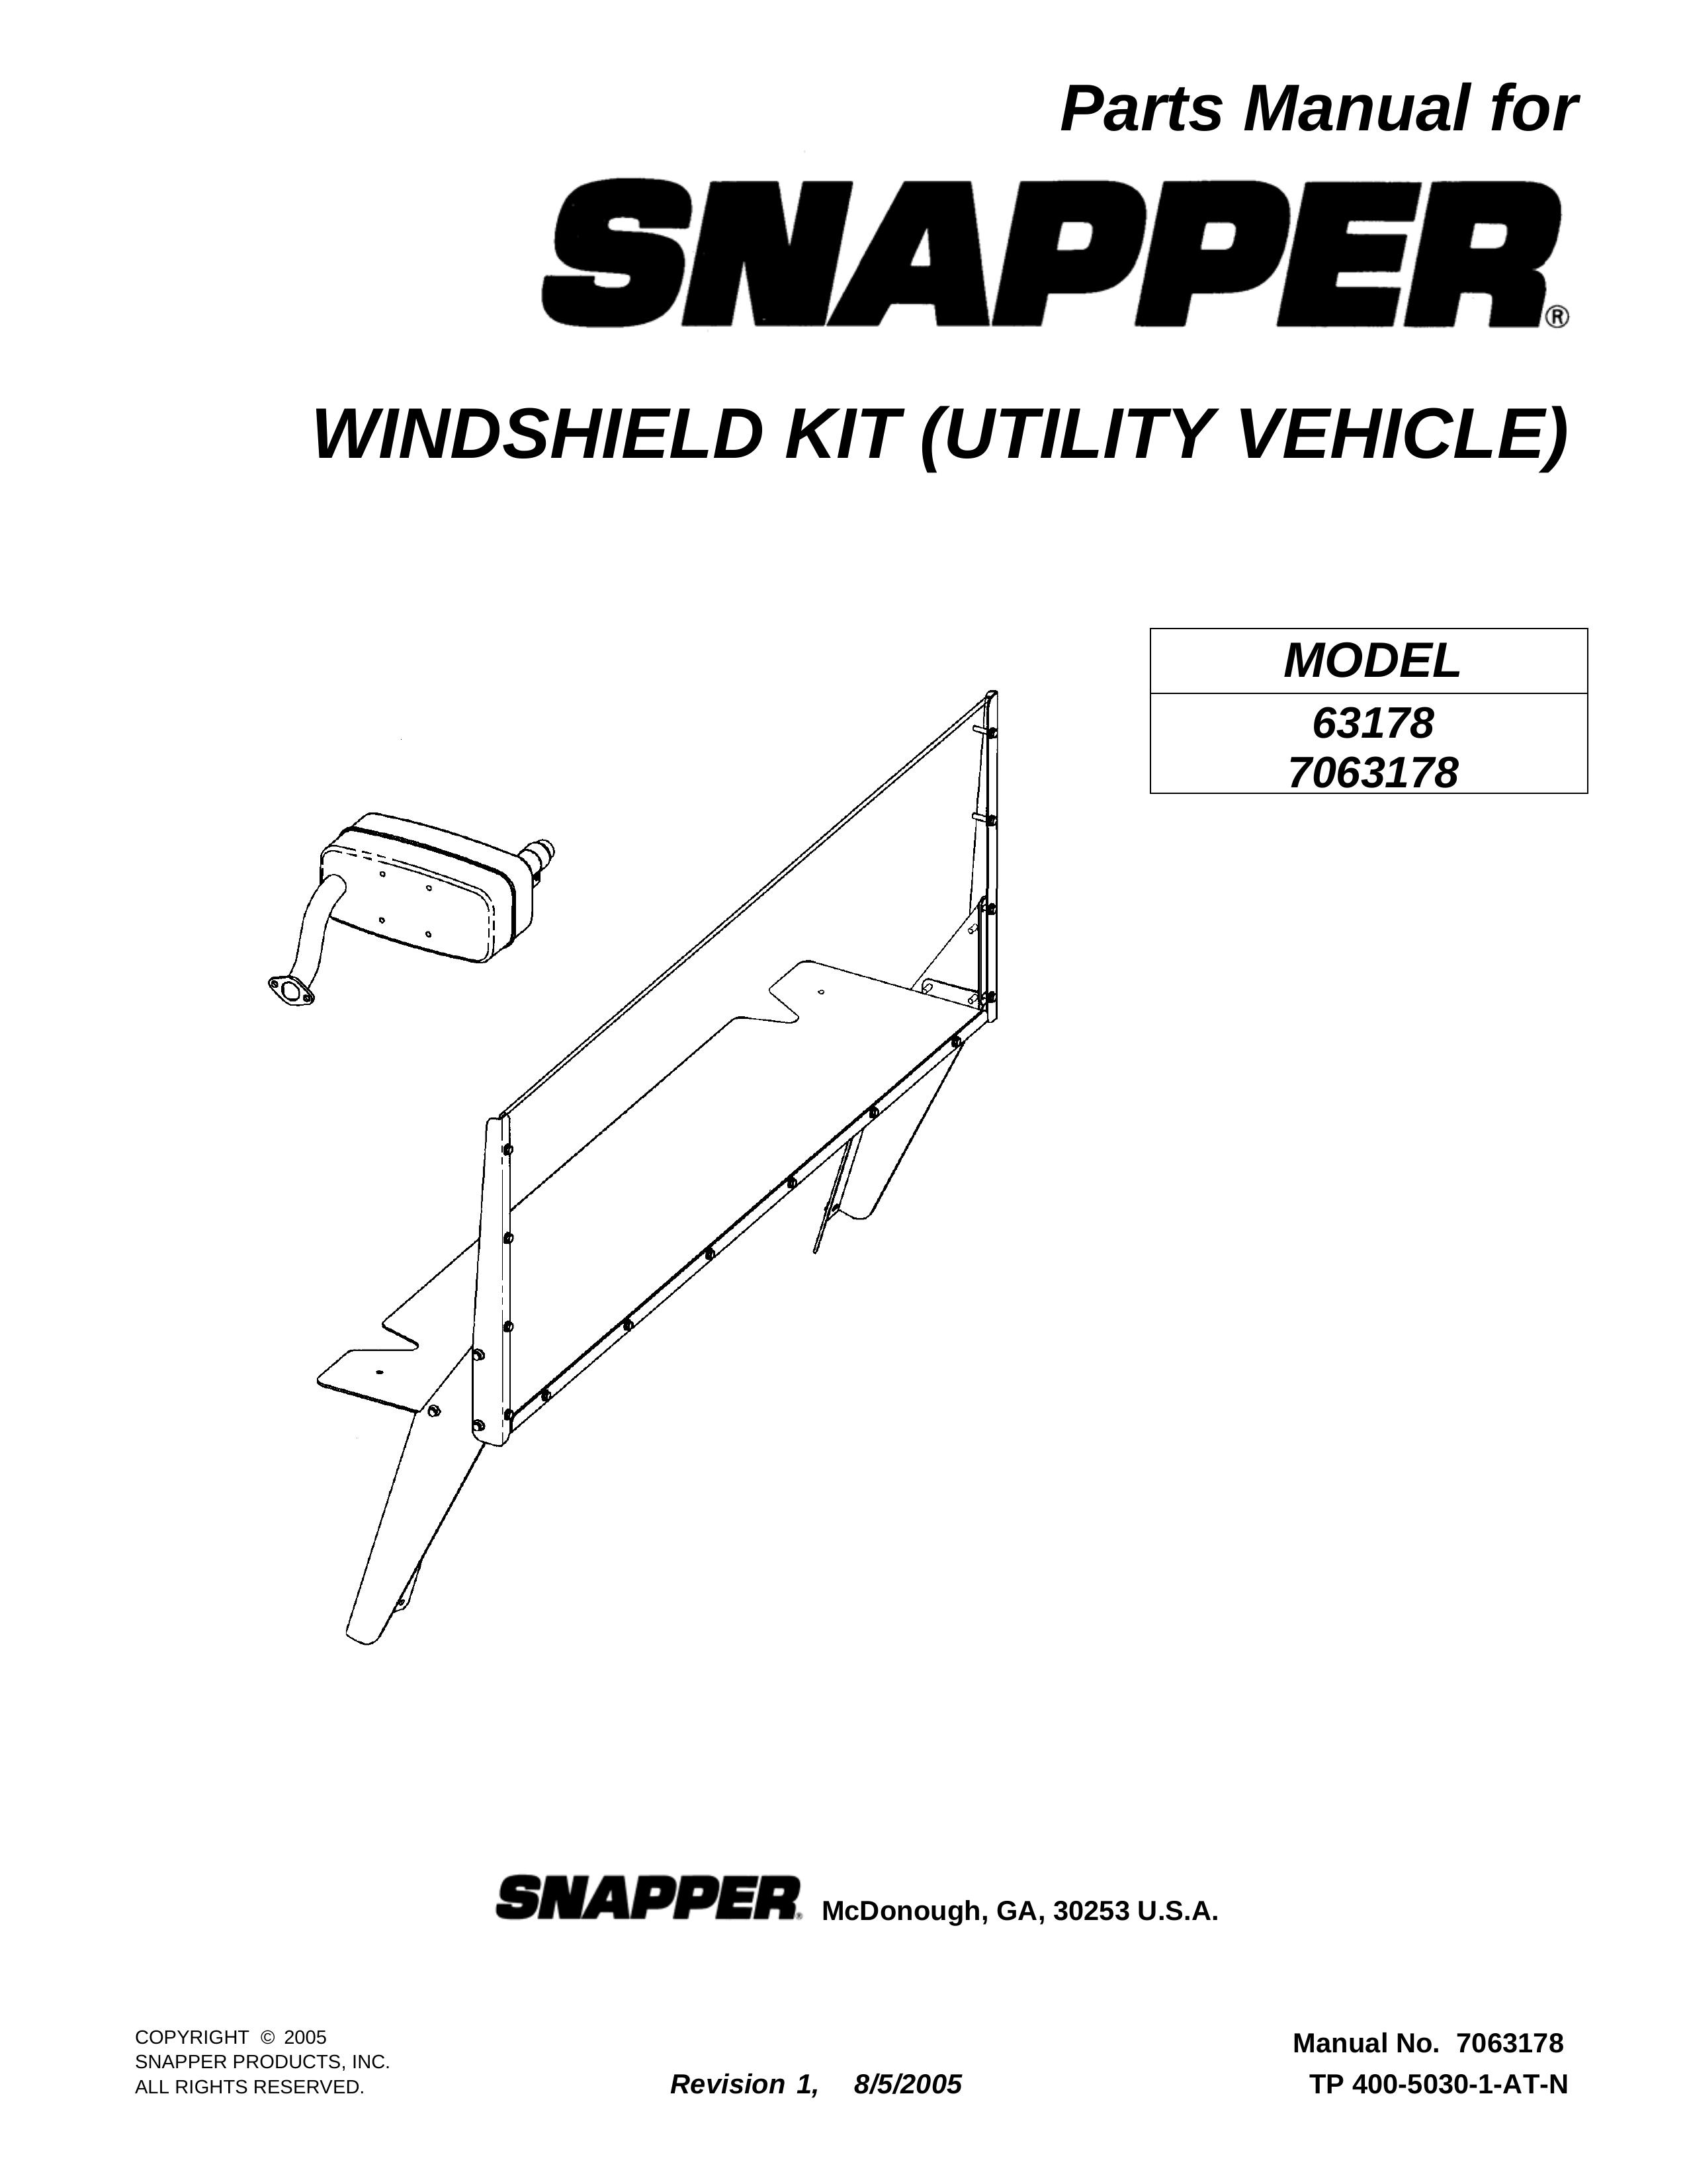 Snapper 7063178 Utility Vehicle User Manual